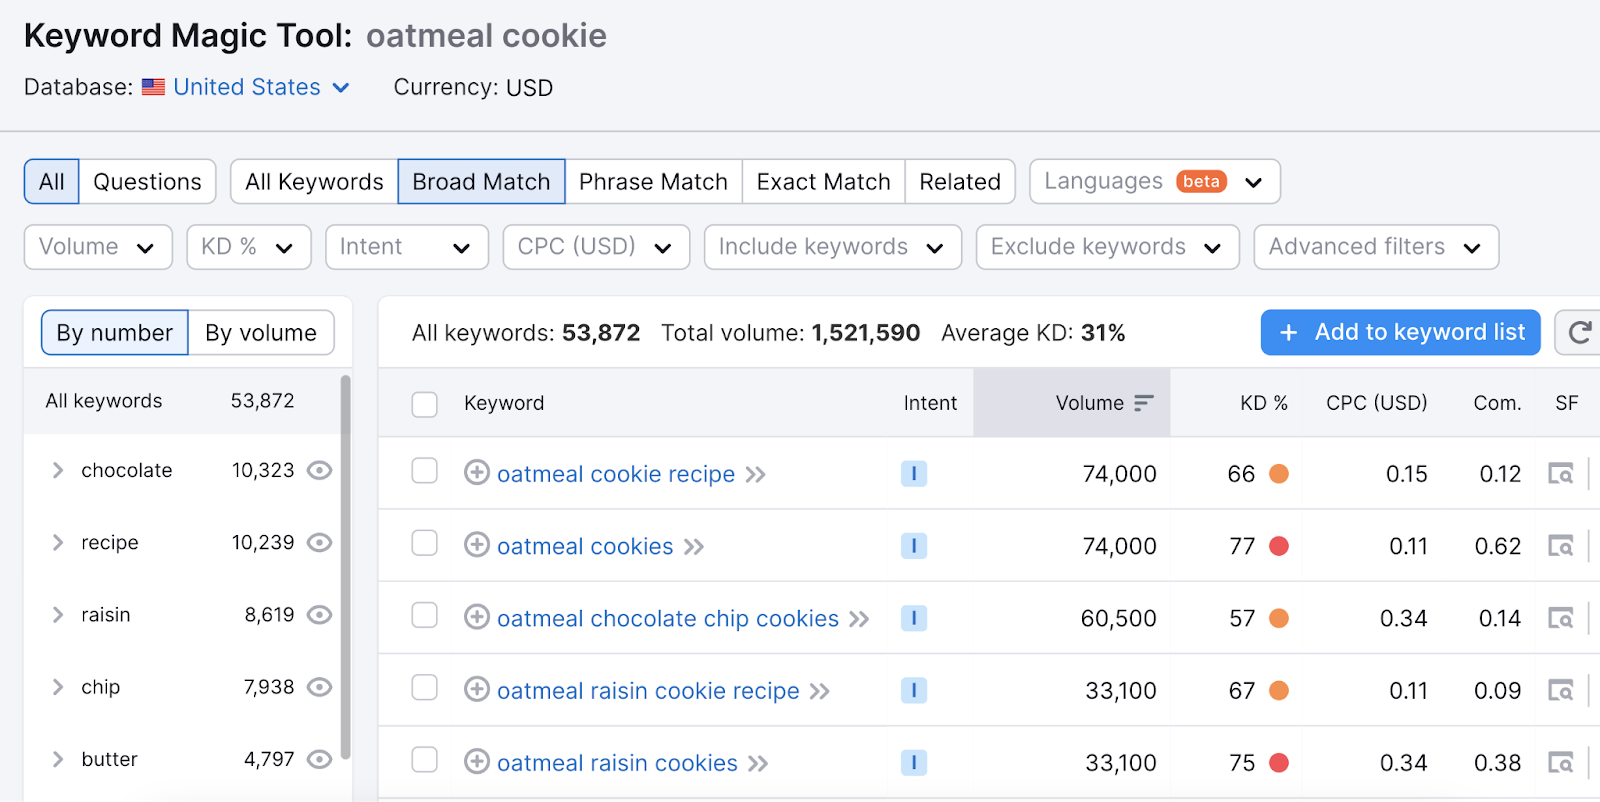 Keyword hunt  results for "oatmeal cookie" are oatmeal cooky  recipe, oatmeal cocoa  spot   cookies, oatmeal raisin cookies, and more